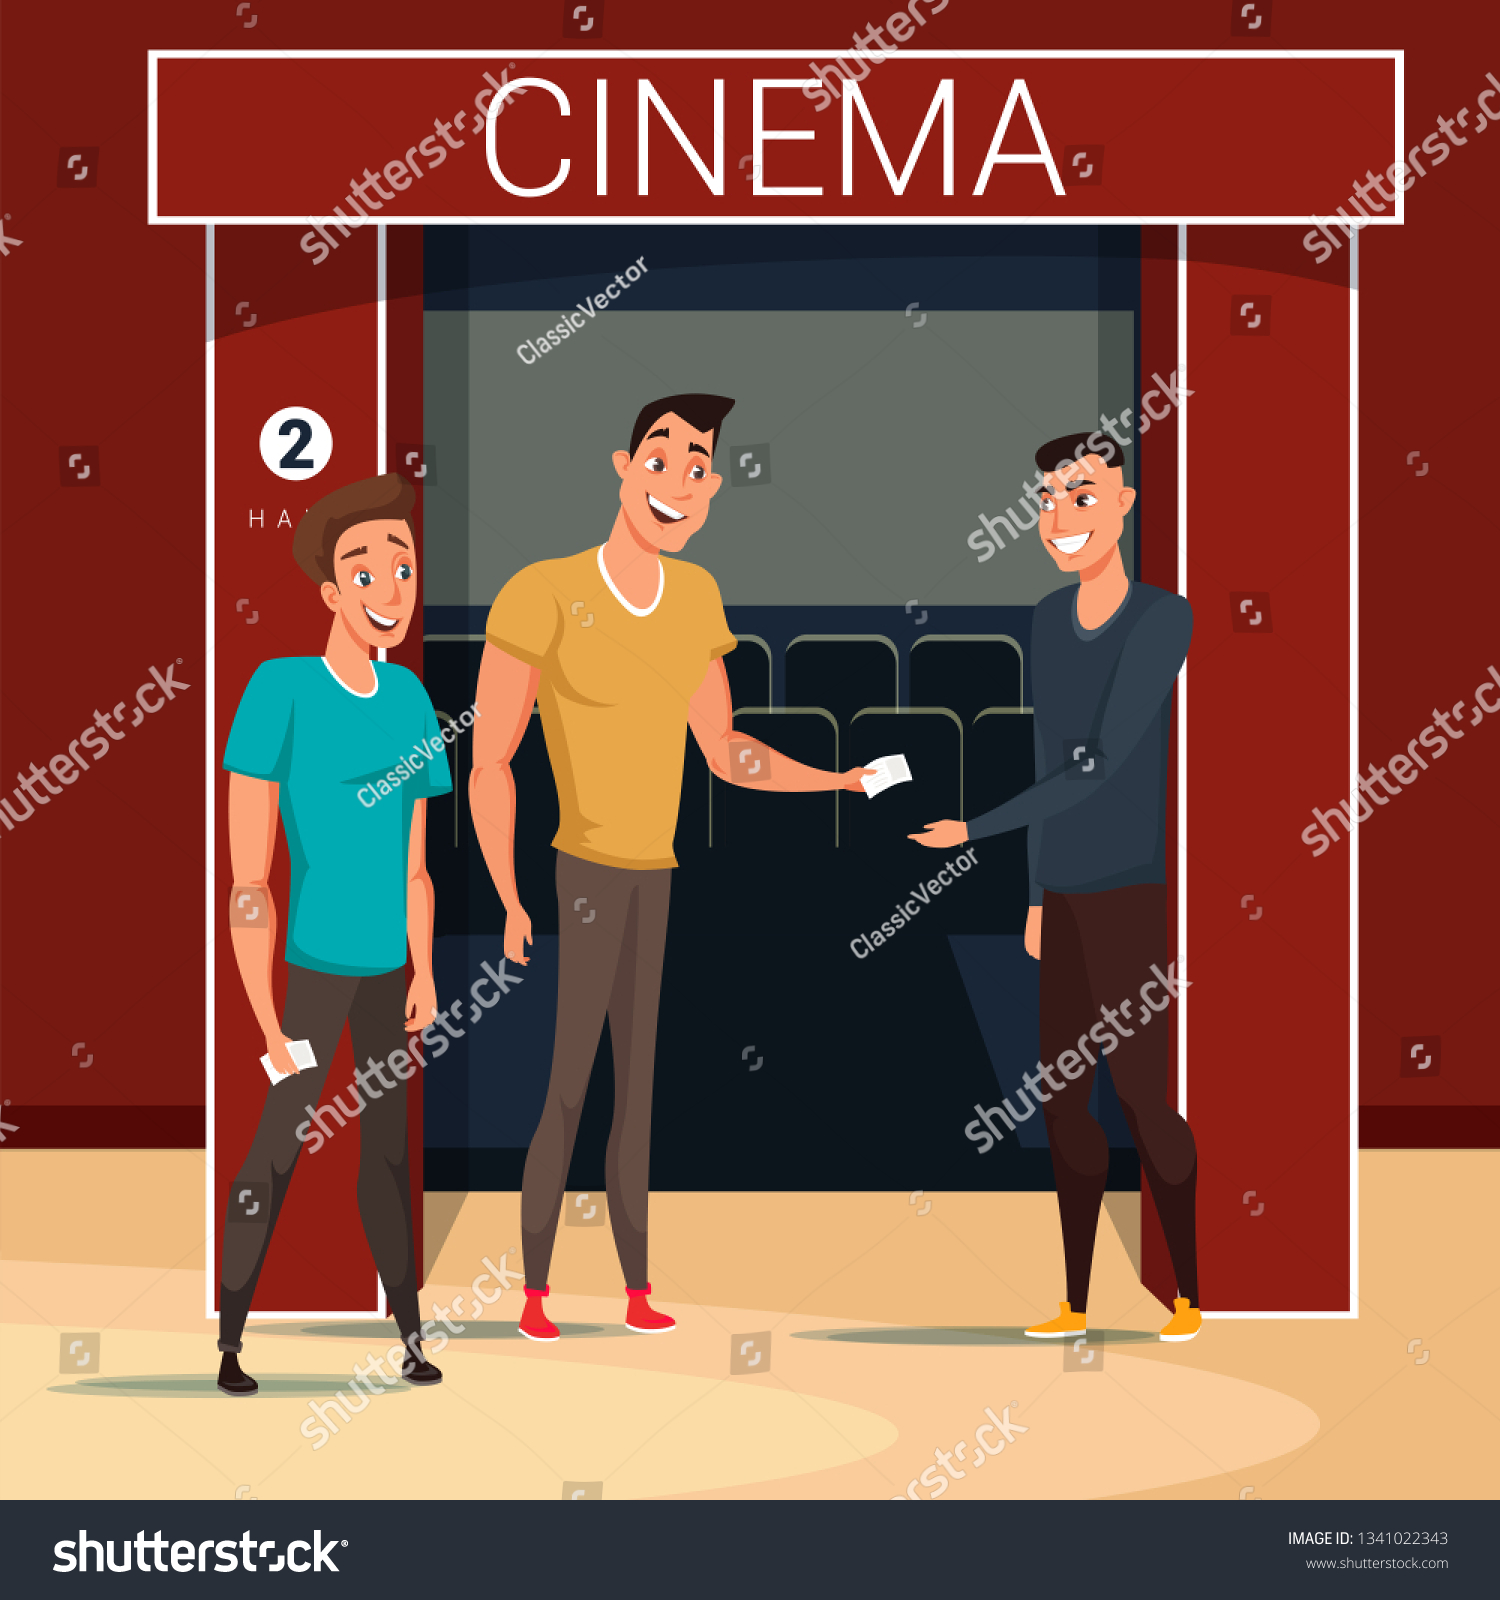 SVG of Friends going to cinema flat vector illustration. Worker cartoon character checking tickets. Seats, screen in empty cinema hall. Colleagues having fun after workday. Men watching film in movie theater svg